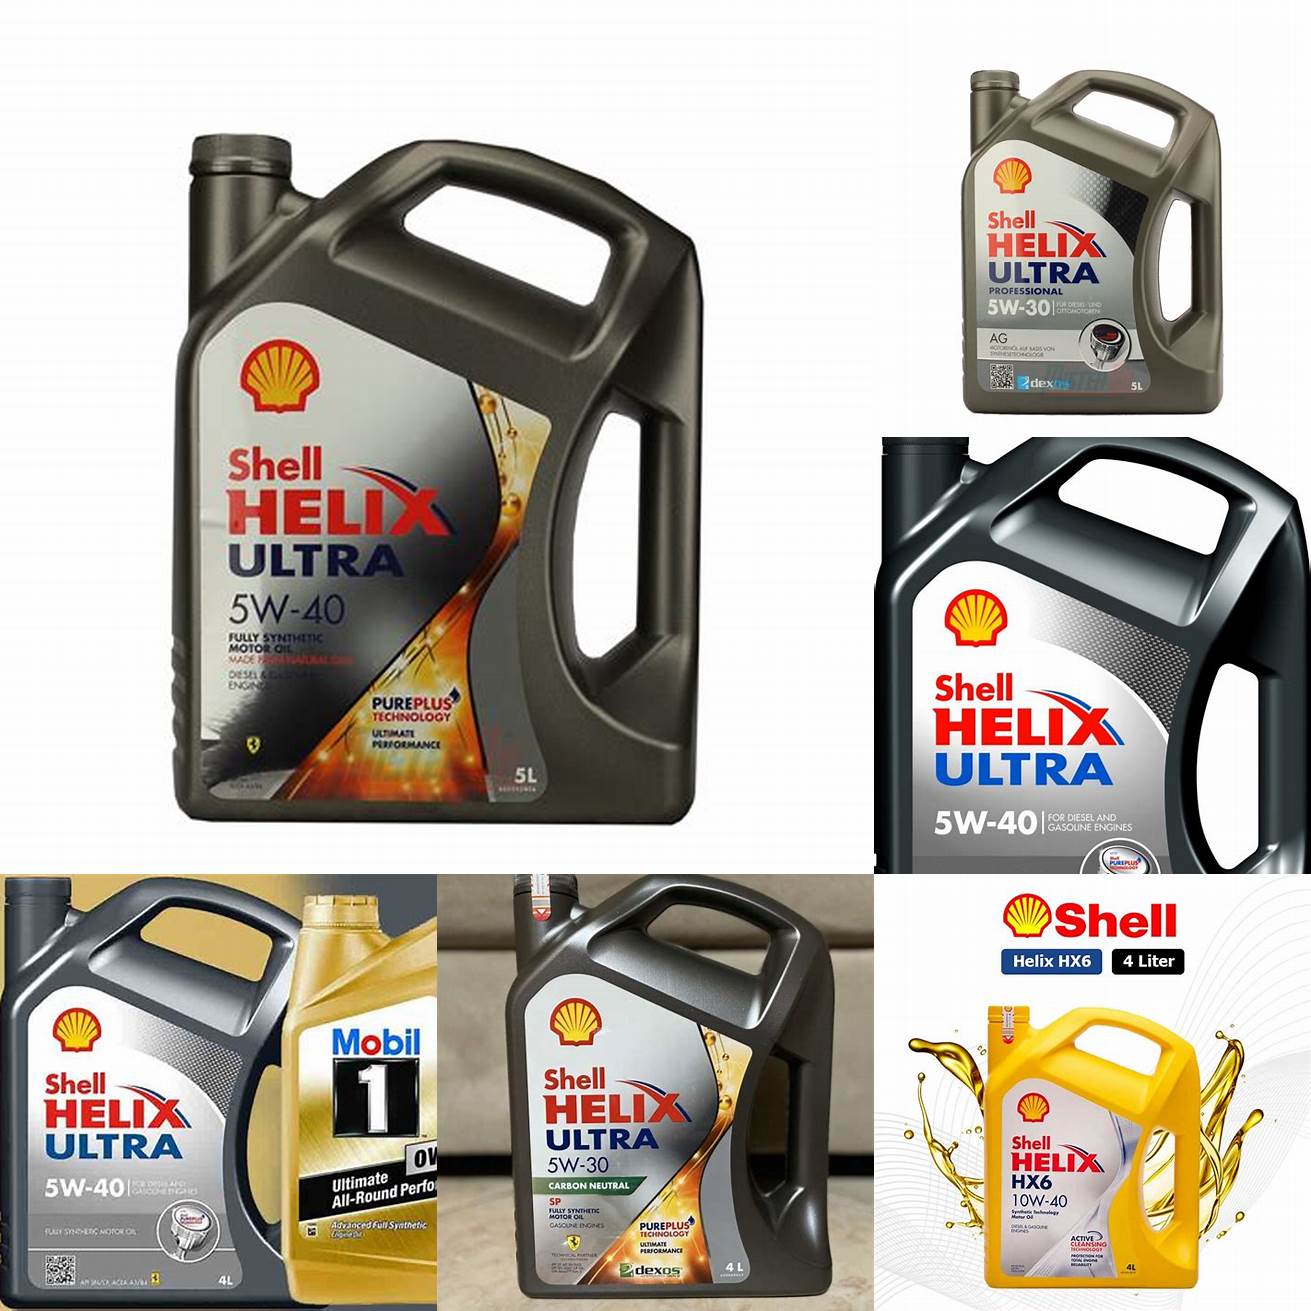 1 Shell Helix Ultra Coolant